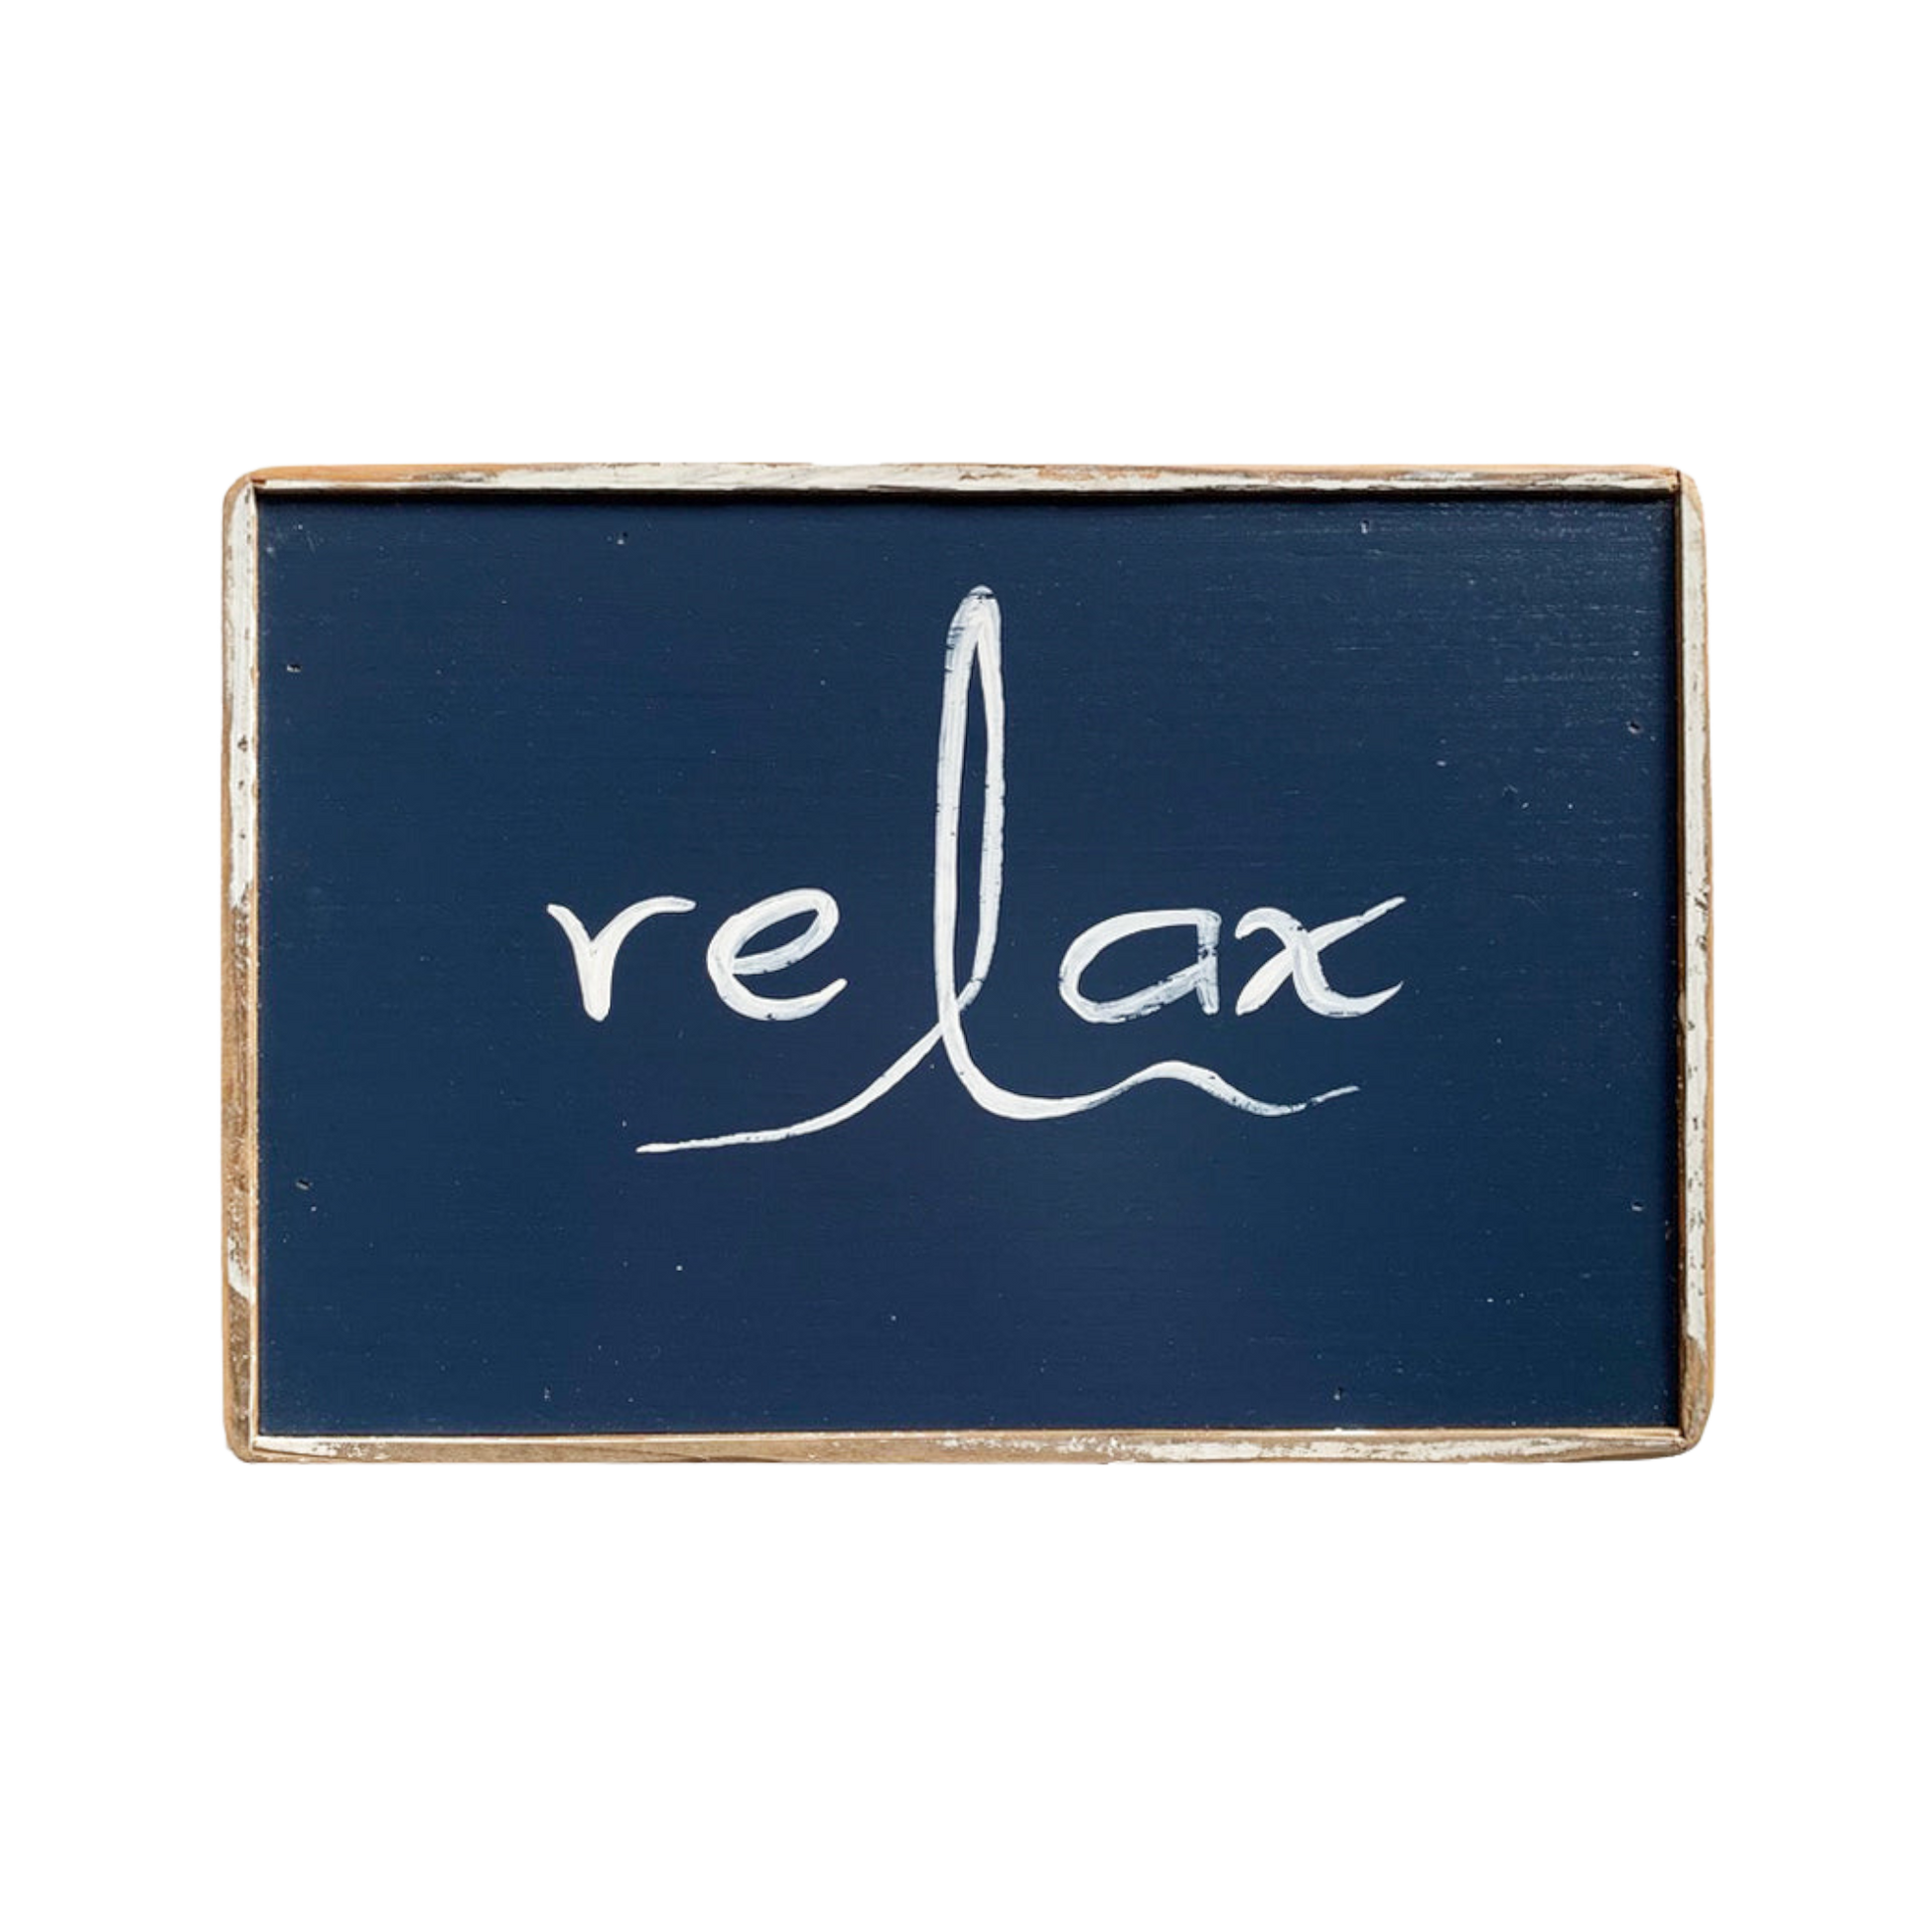 relax naval blue painting